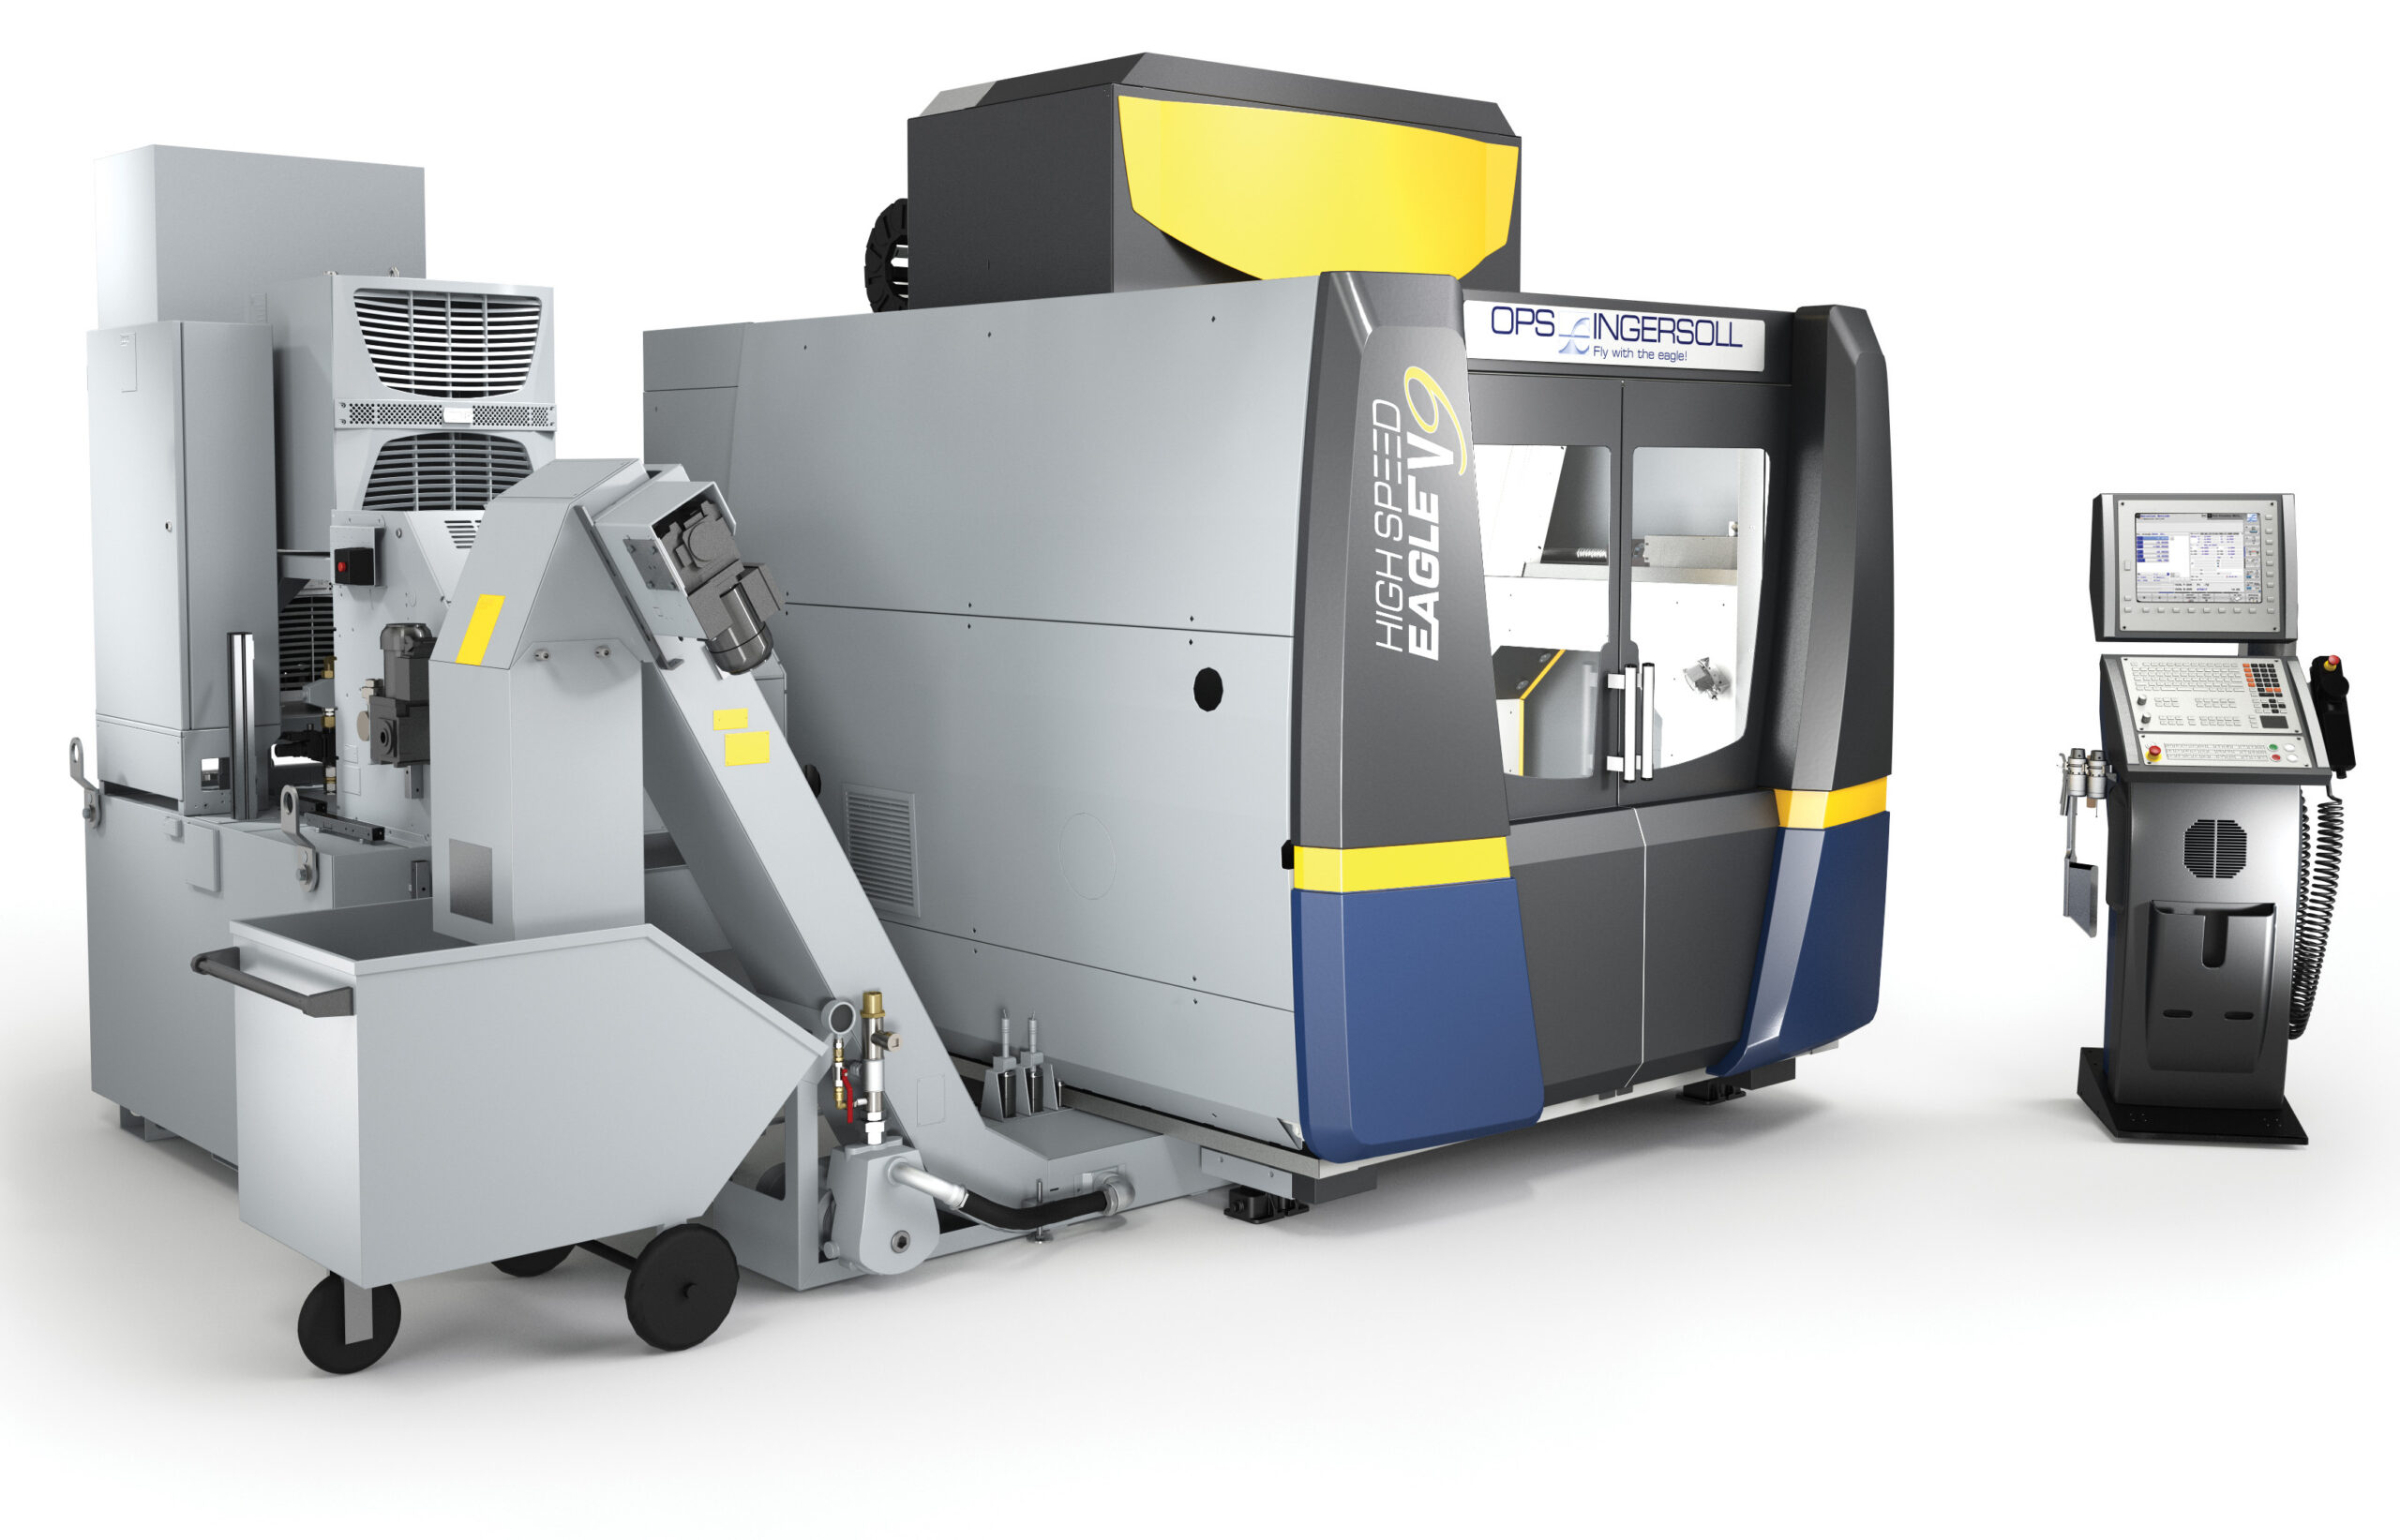 GROB Systems Demonstrates Aerospace, Medical, and Mold 5-Axis